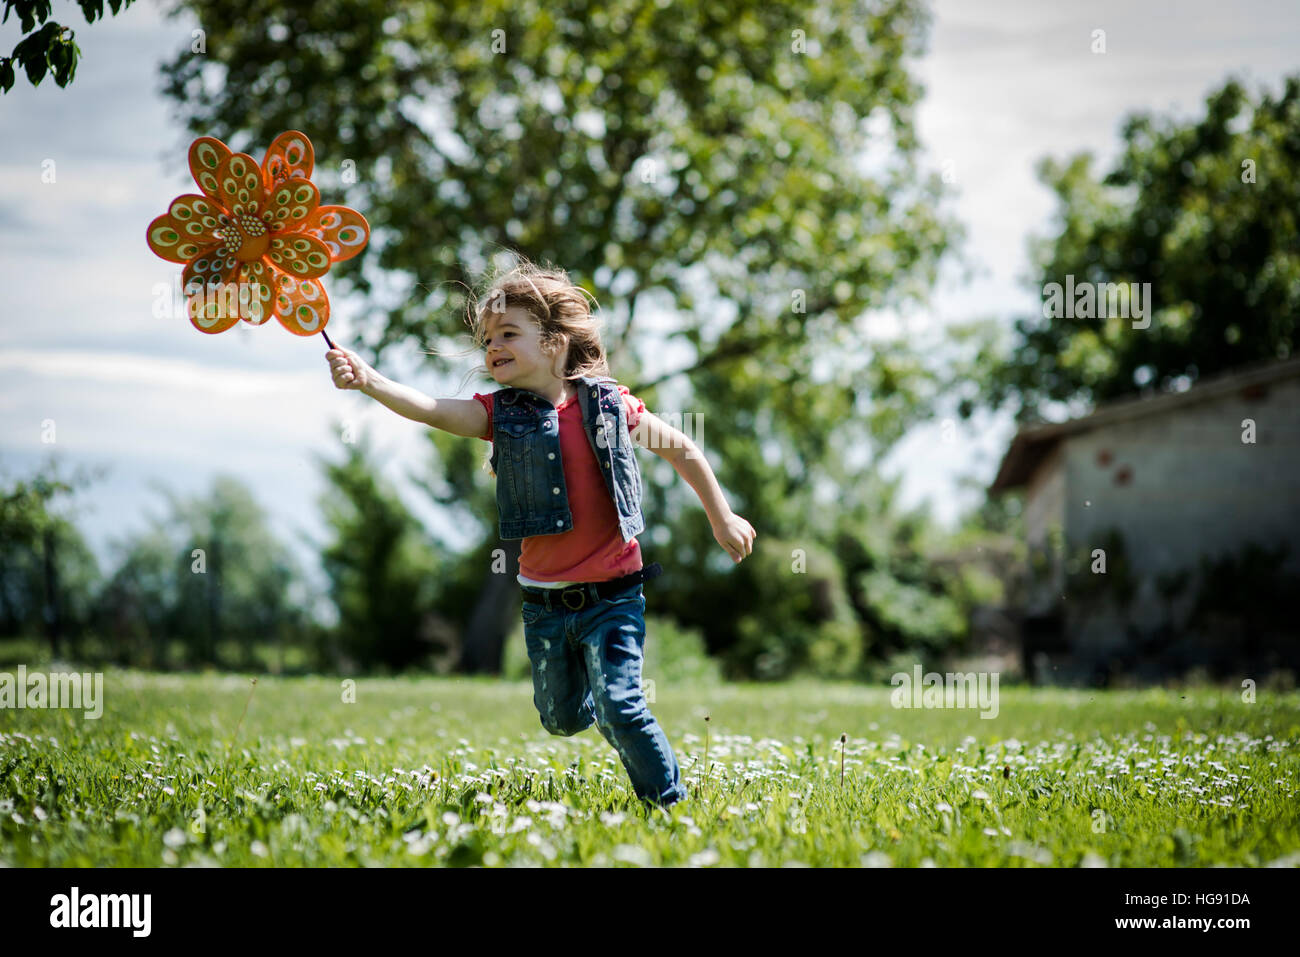 Little girl playing outdoors, running with pinwheel Stock Photo